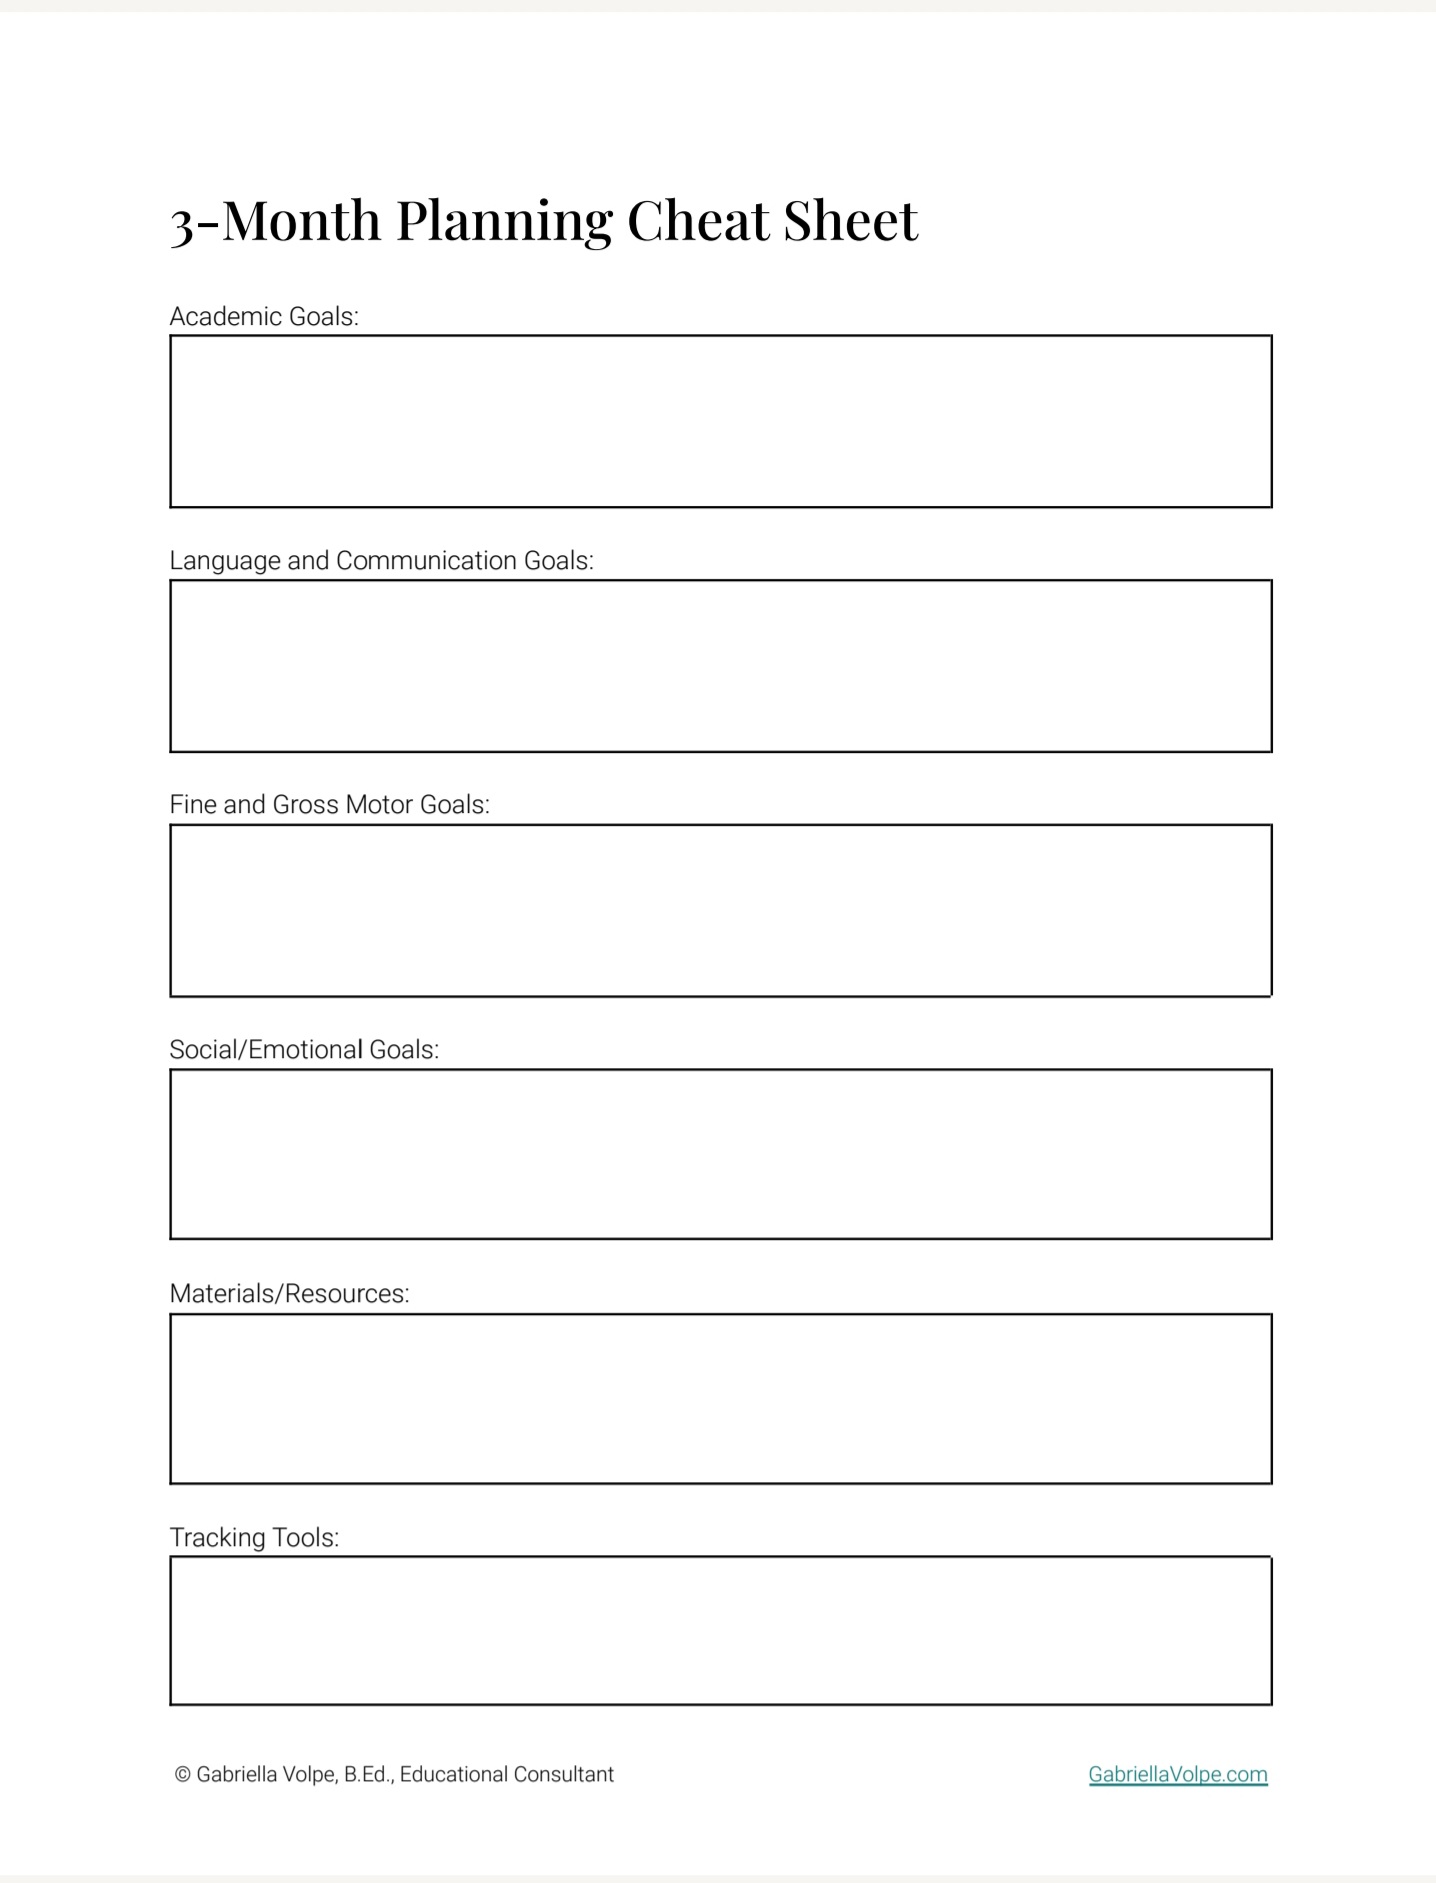 Thumbnail of PDF of sample page from 3-Month Planning Guide